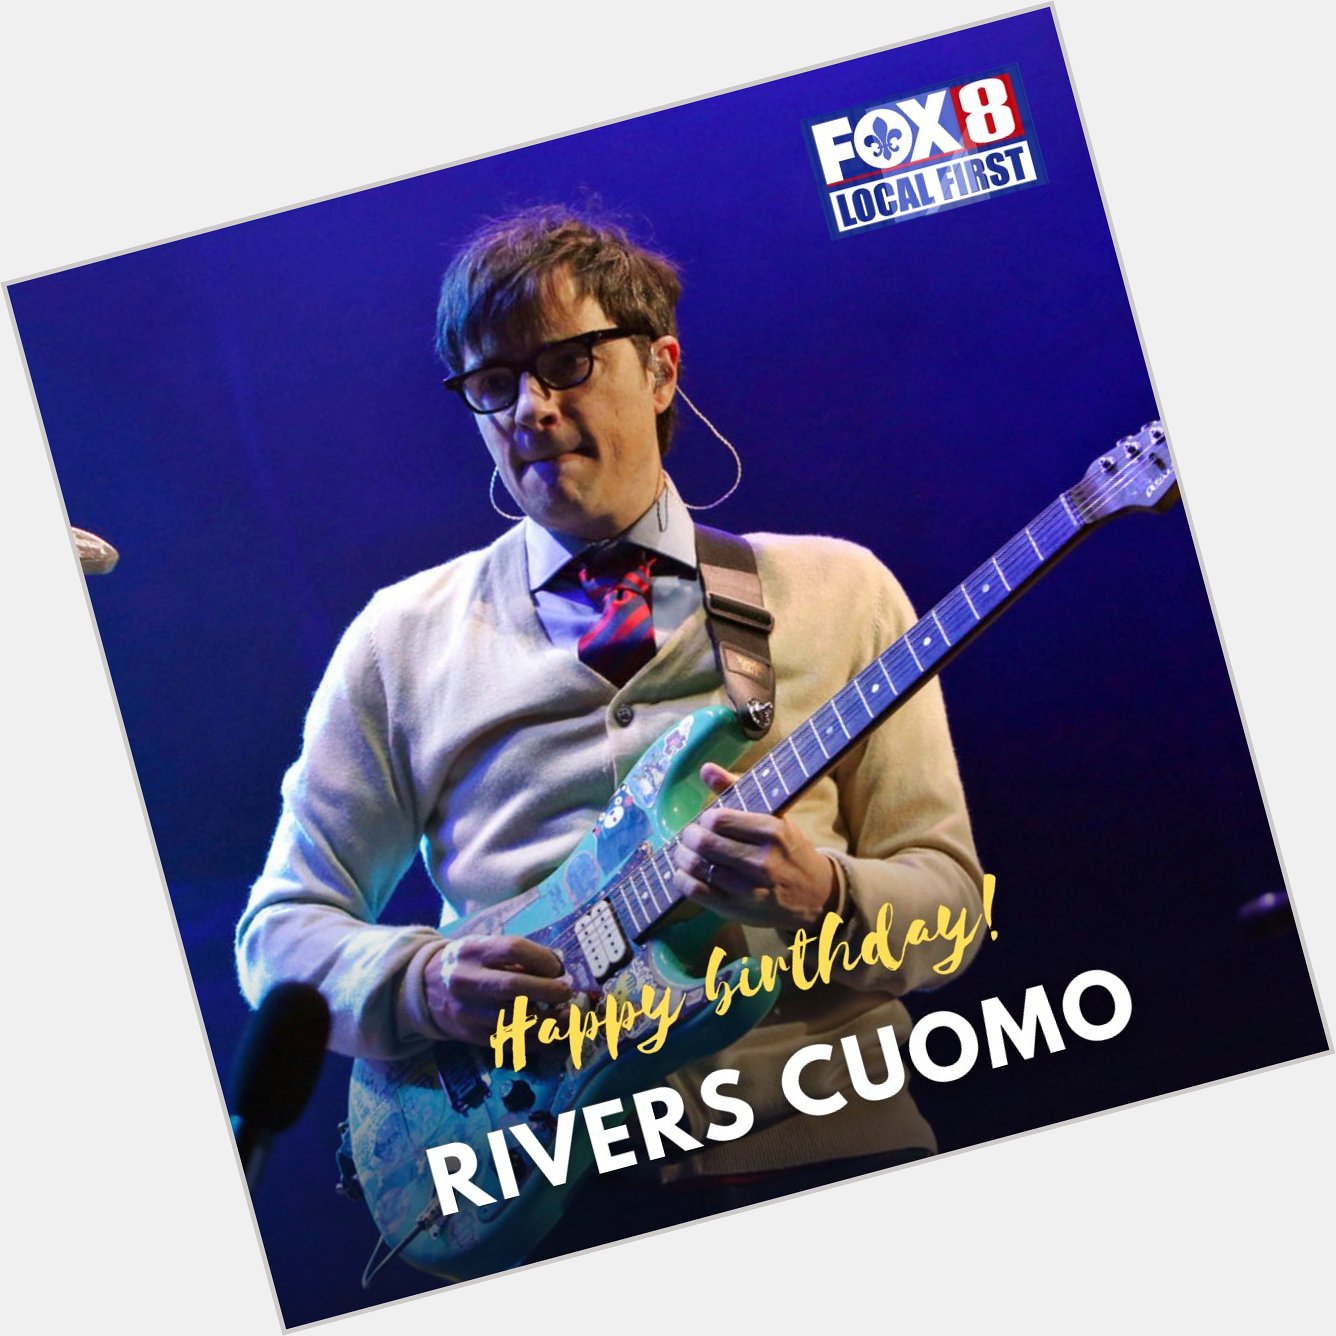 Happy birthday to the frontman of the rock band Weezer, Rivers Cuomo! 